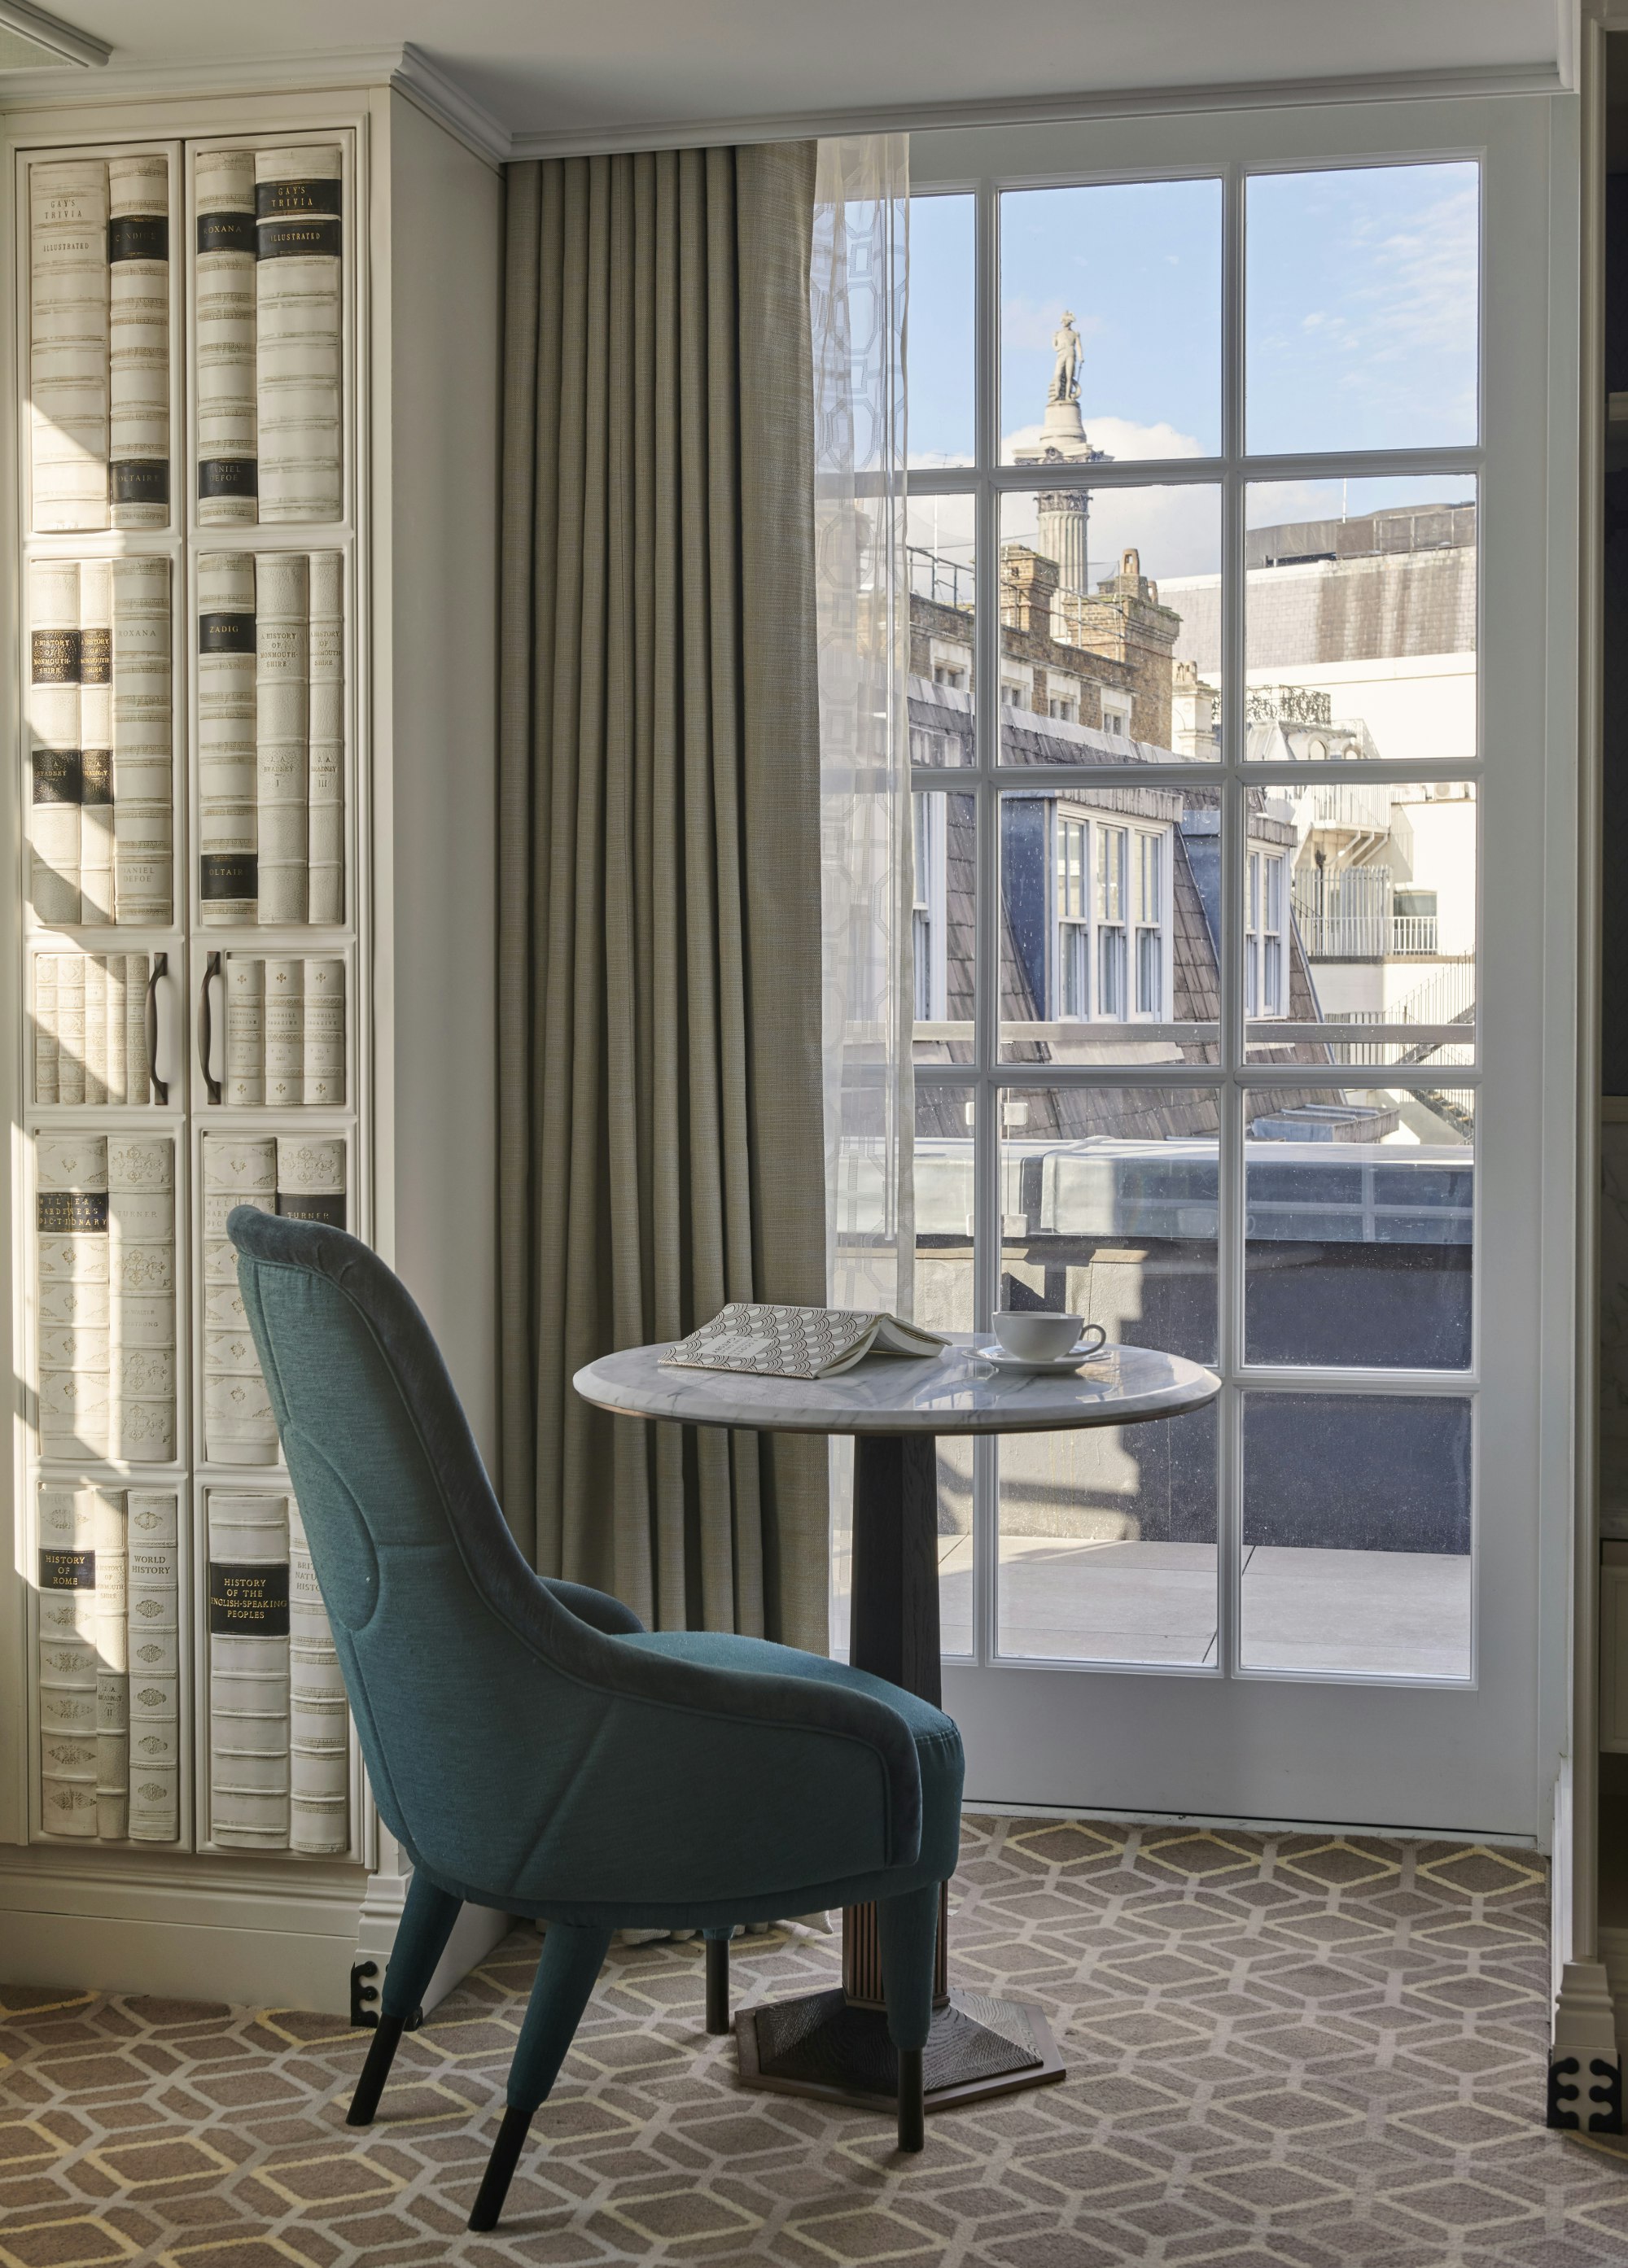 The rooms at Great Scotland Yard Hotel offer stunning views of London 